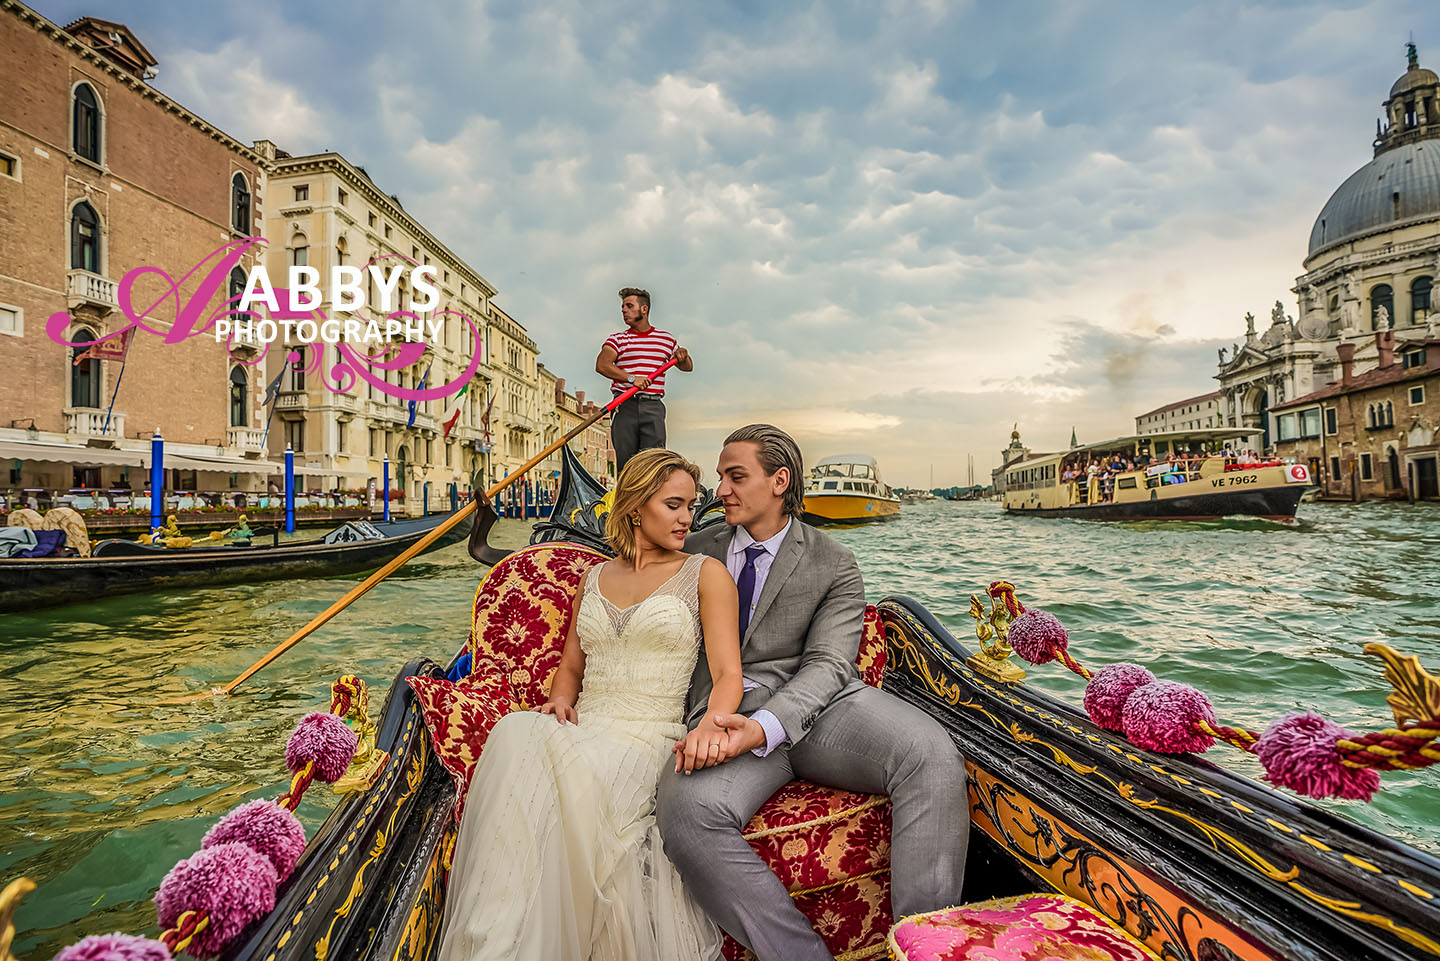 Abbys Photography can make you feel like your wedding or engagement is in Venice instead of Kern County. Call 661-342-4945  